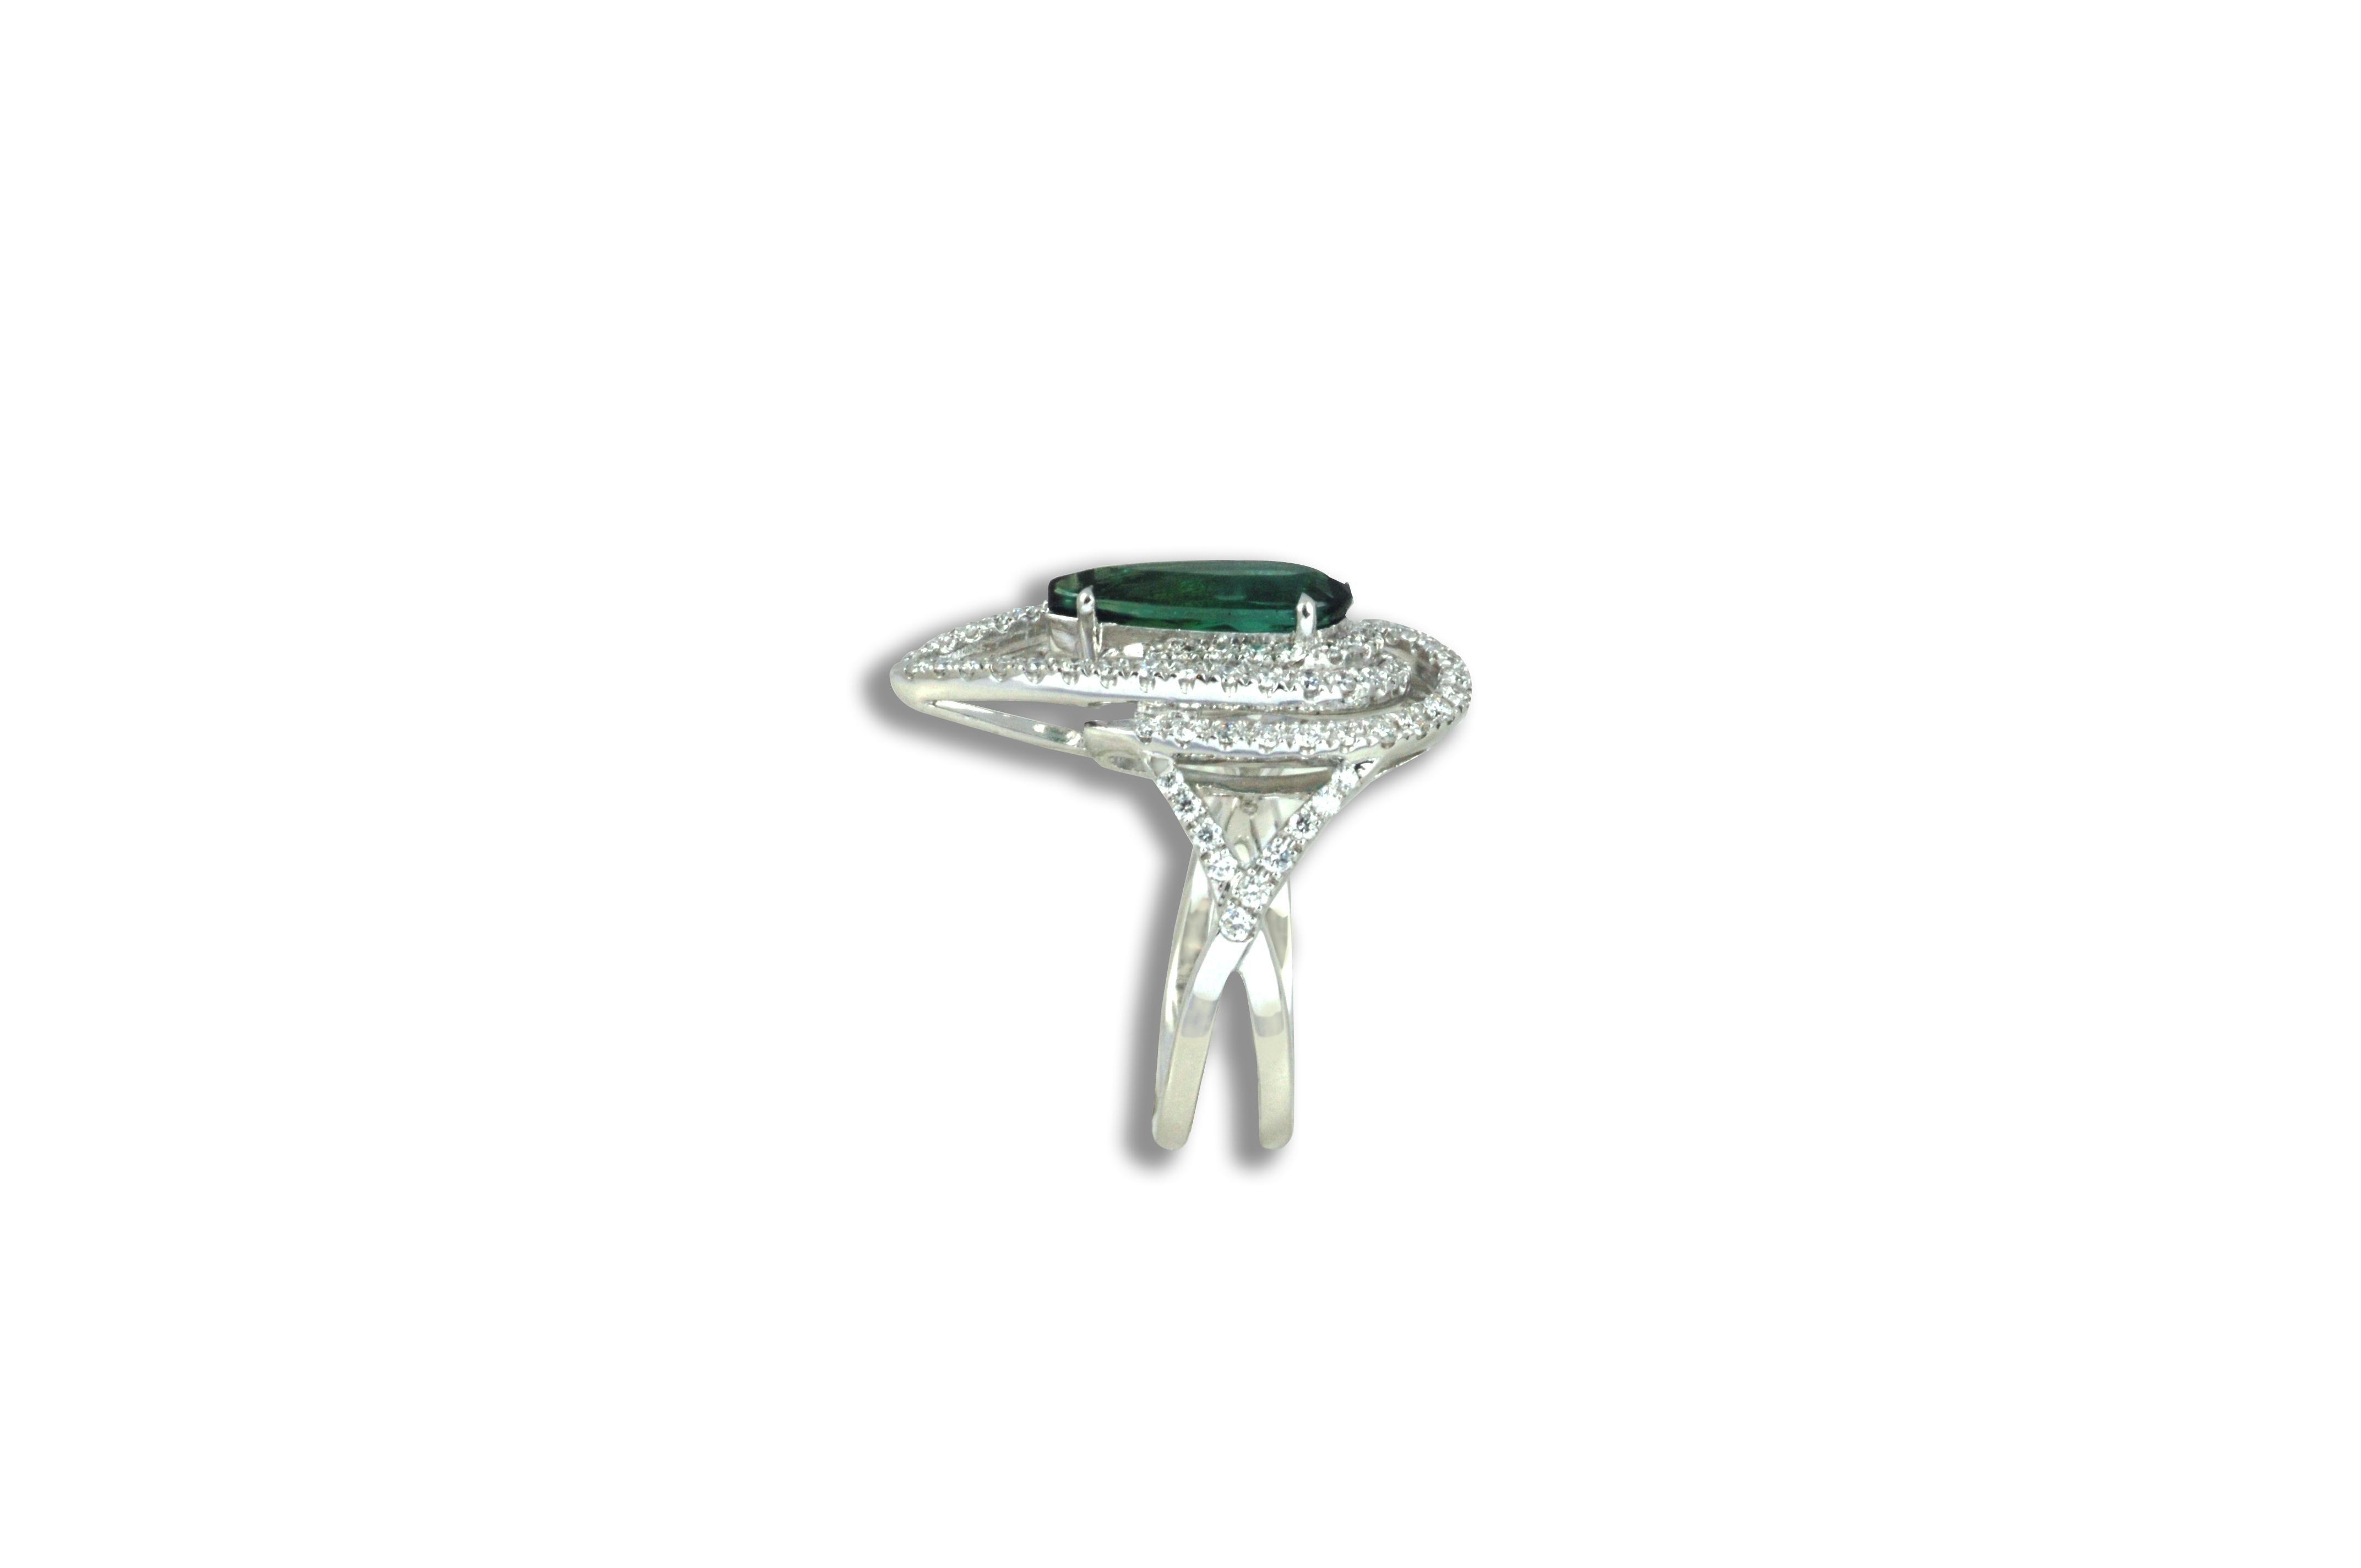 Green Tourmaline 1.45 carats with Diamond 0.62 carat Ring in 18 karat White Gold Settings

Width: 1.7 cm
Length: 2.3 cm
Ring Size: 52
Total Weight: 7.55 grams

